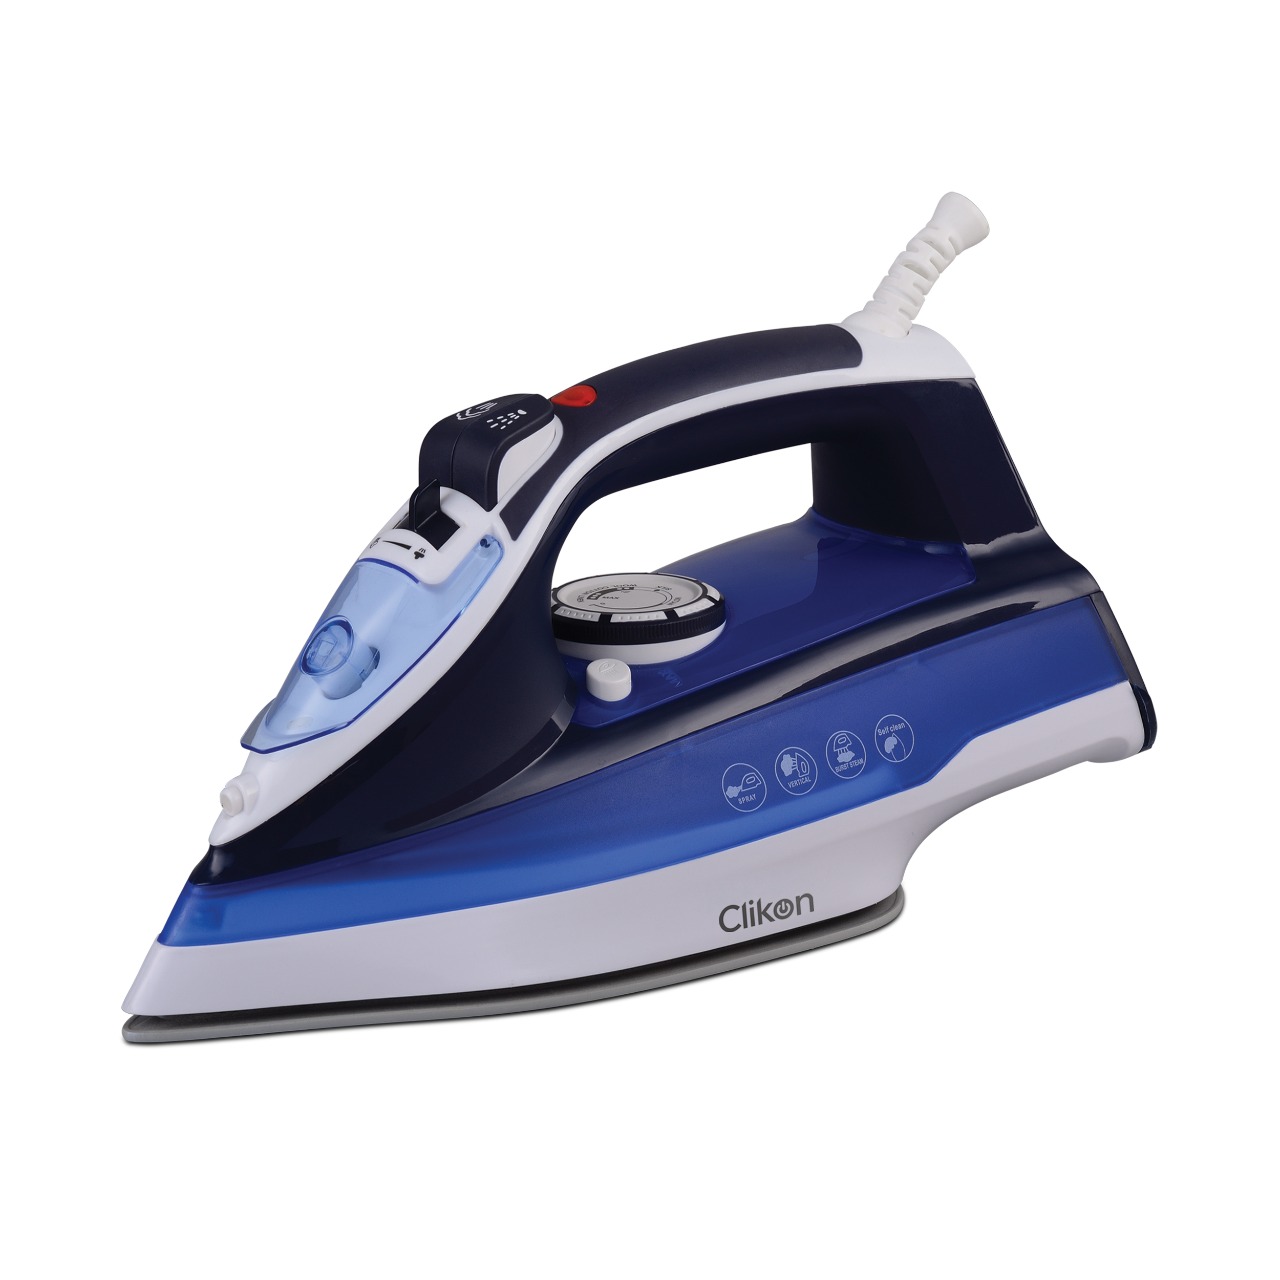 Clikon Steam Iron-2400W Ceramic Coated Non-Stick Soleplate Anti-Drip Function - CK4127